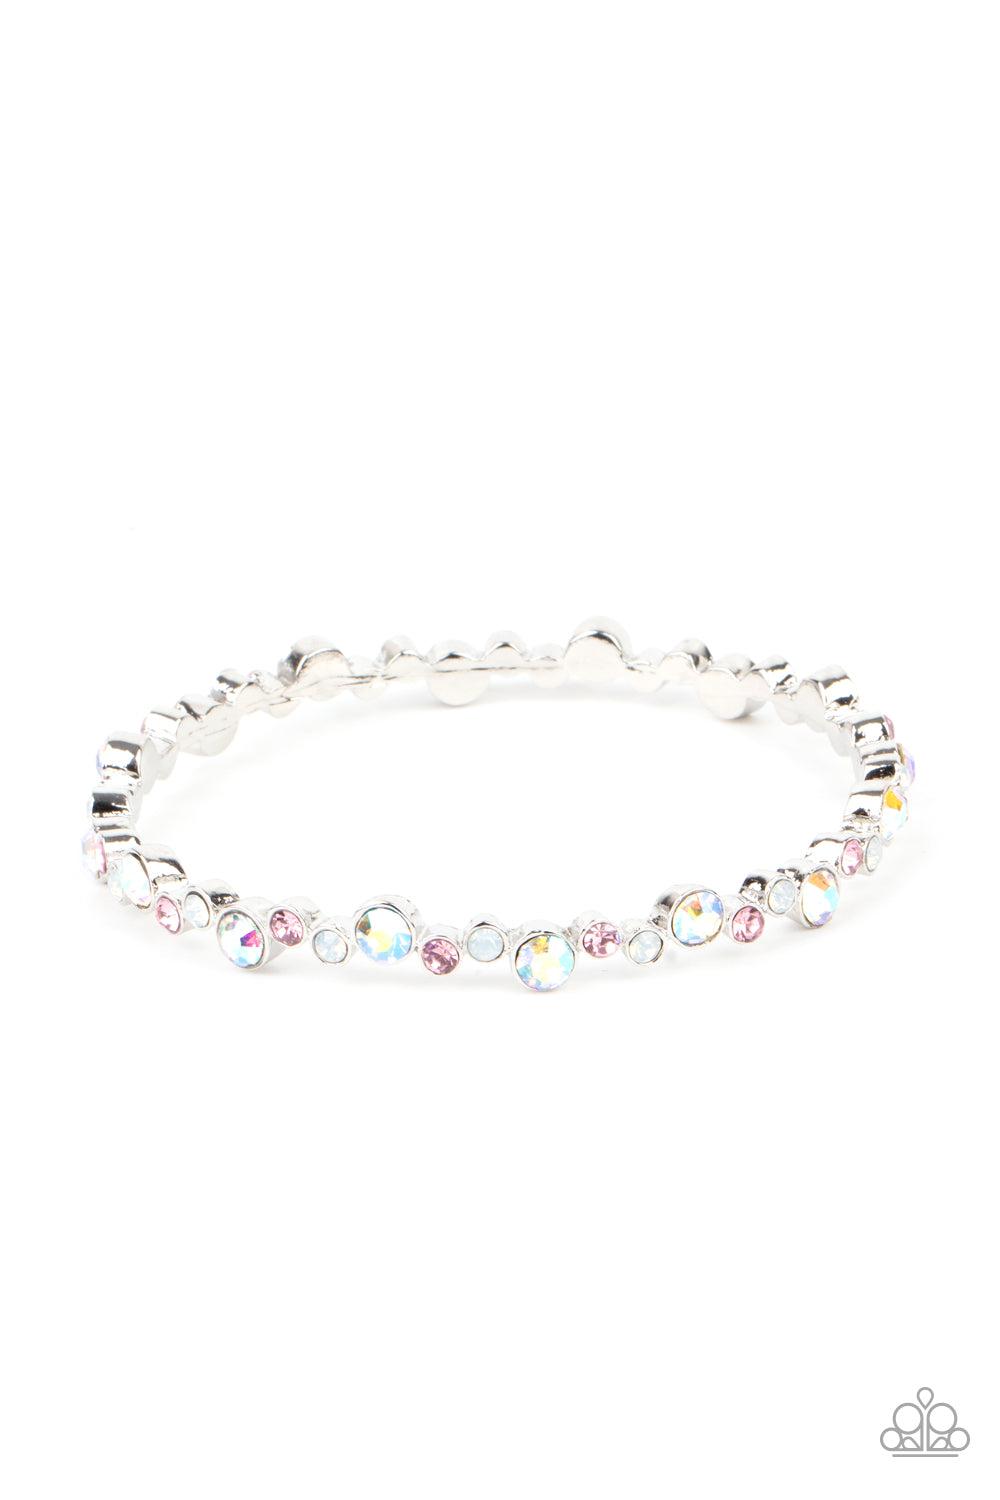 Twinkly Trendsetter Multi Pink, White and Iridescent Rhinestone Bangle Bracelet - Paparazzi Accessories- lightbox - CarasShop.com - $5 Jewelry by Cara Jewels